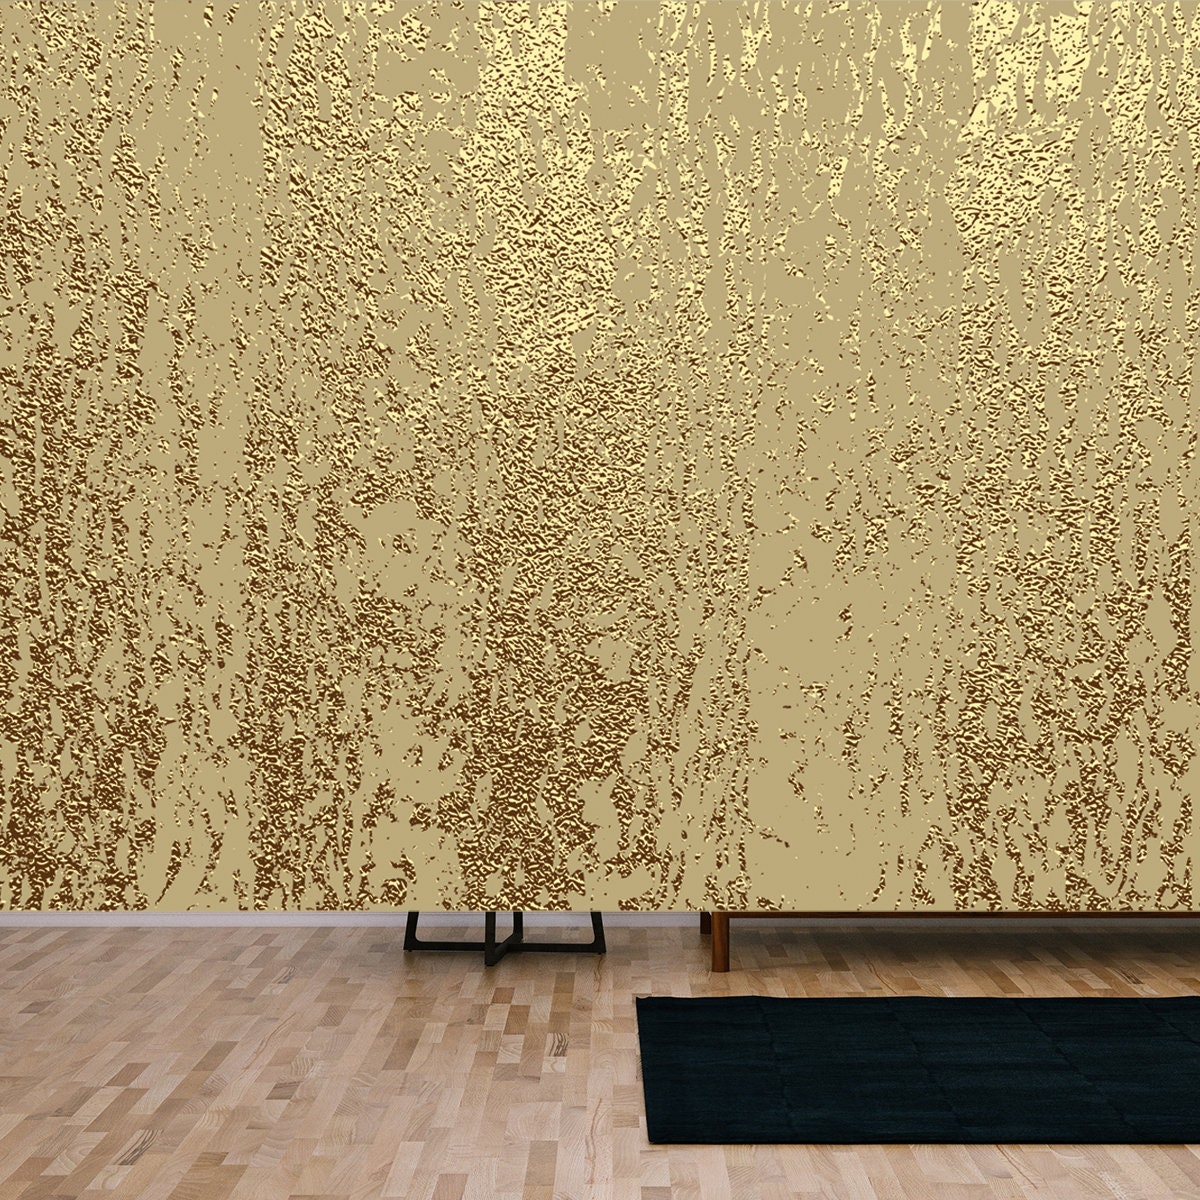 Gold Grunge Texture to Create Distressed Effect. Patina Scratch Golden Elements Wallpaper Living Room Mural